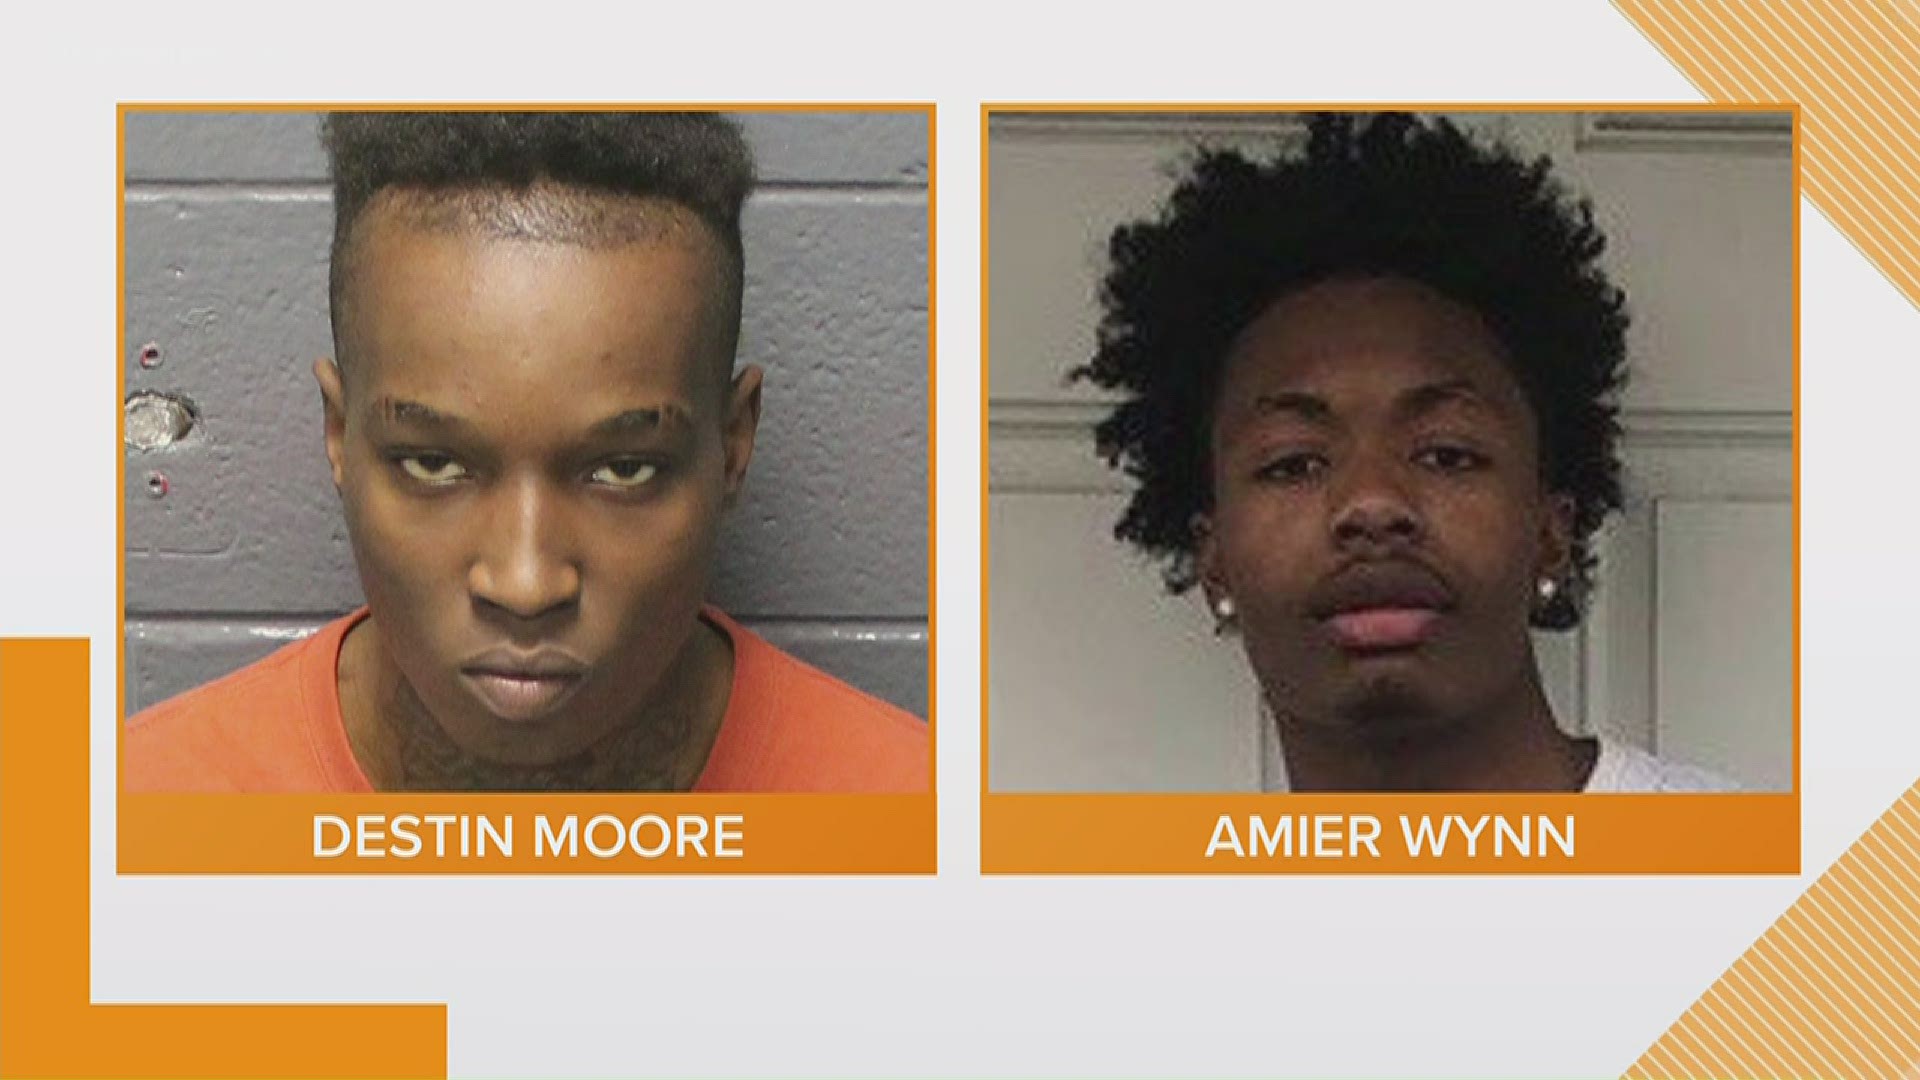 Amier Wynn, 16, turned himself in to police after being sought in a homicide investigation. Police are still searching for Destin Moore, 22. He faces murder charges.